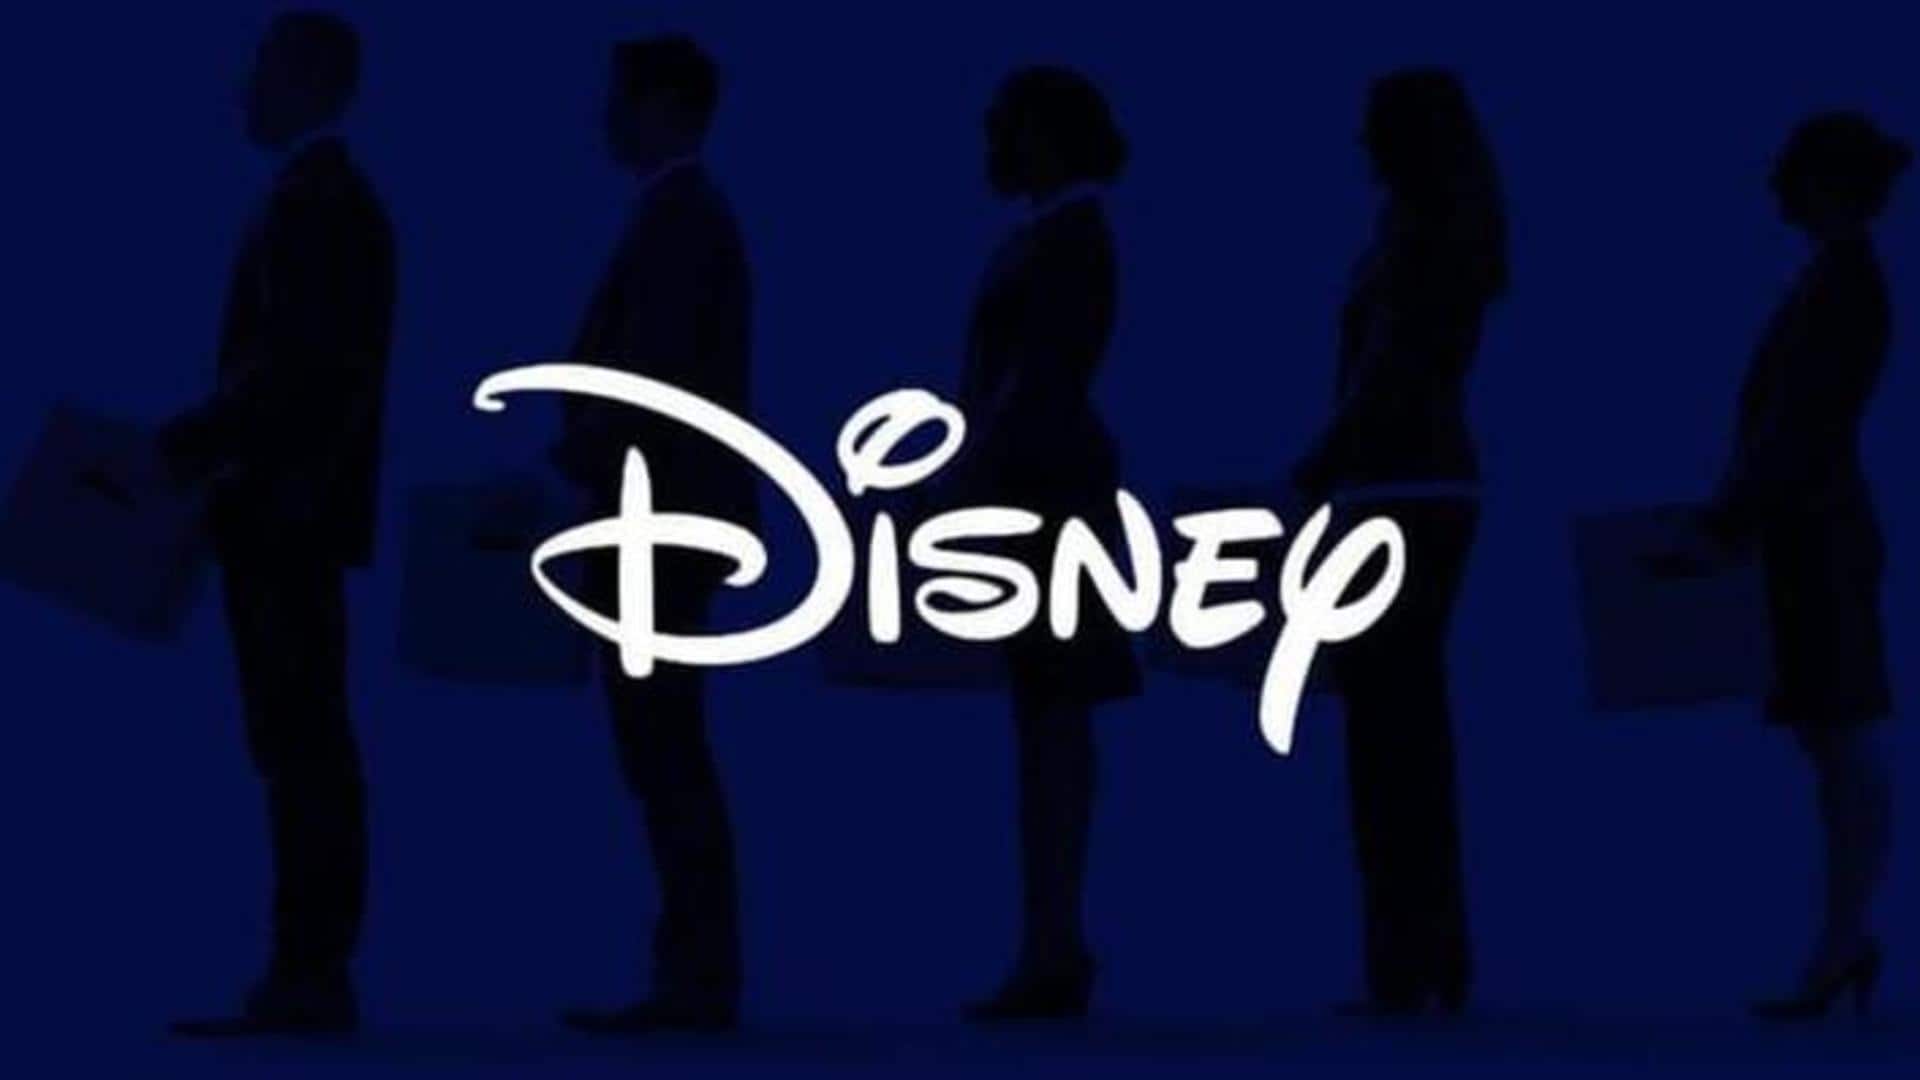 Disney's third round of layoffs: Over 2,500 to be affected